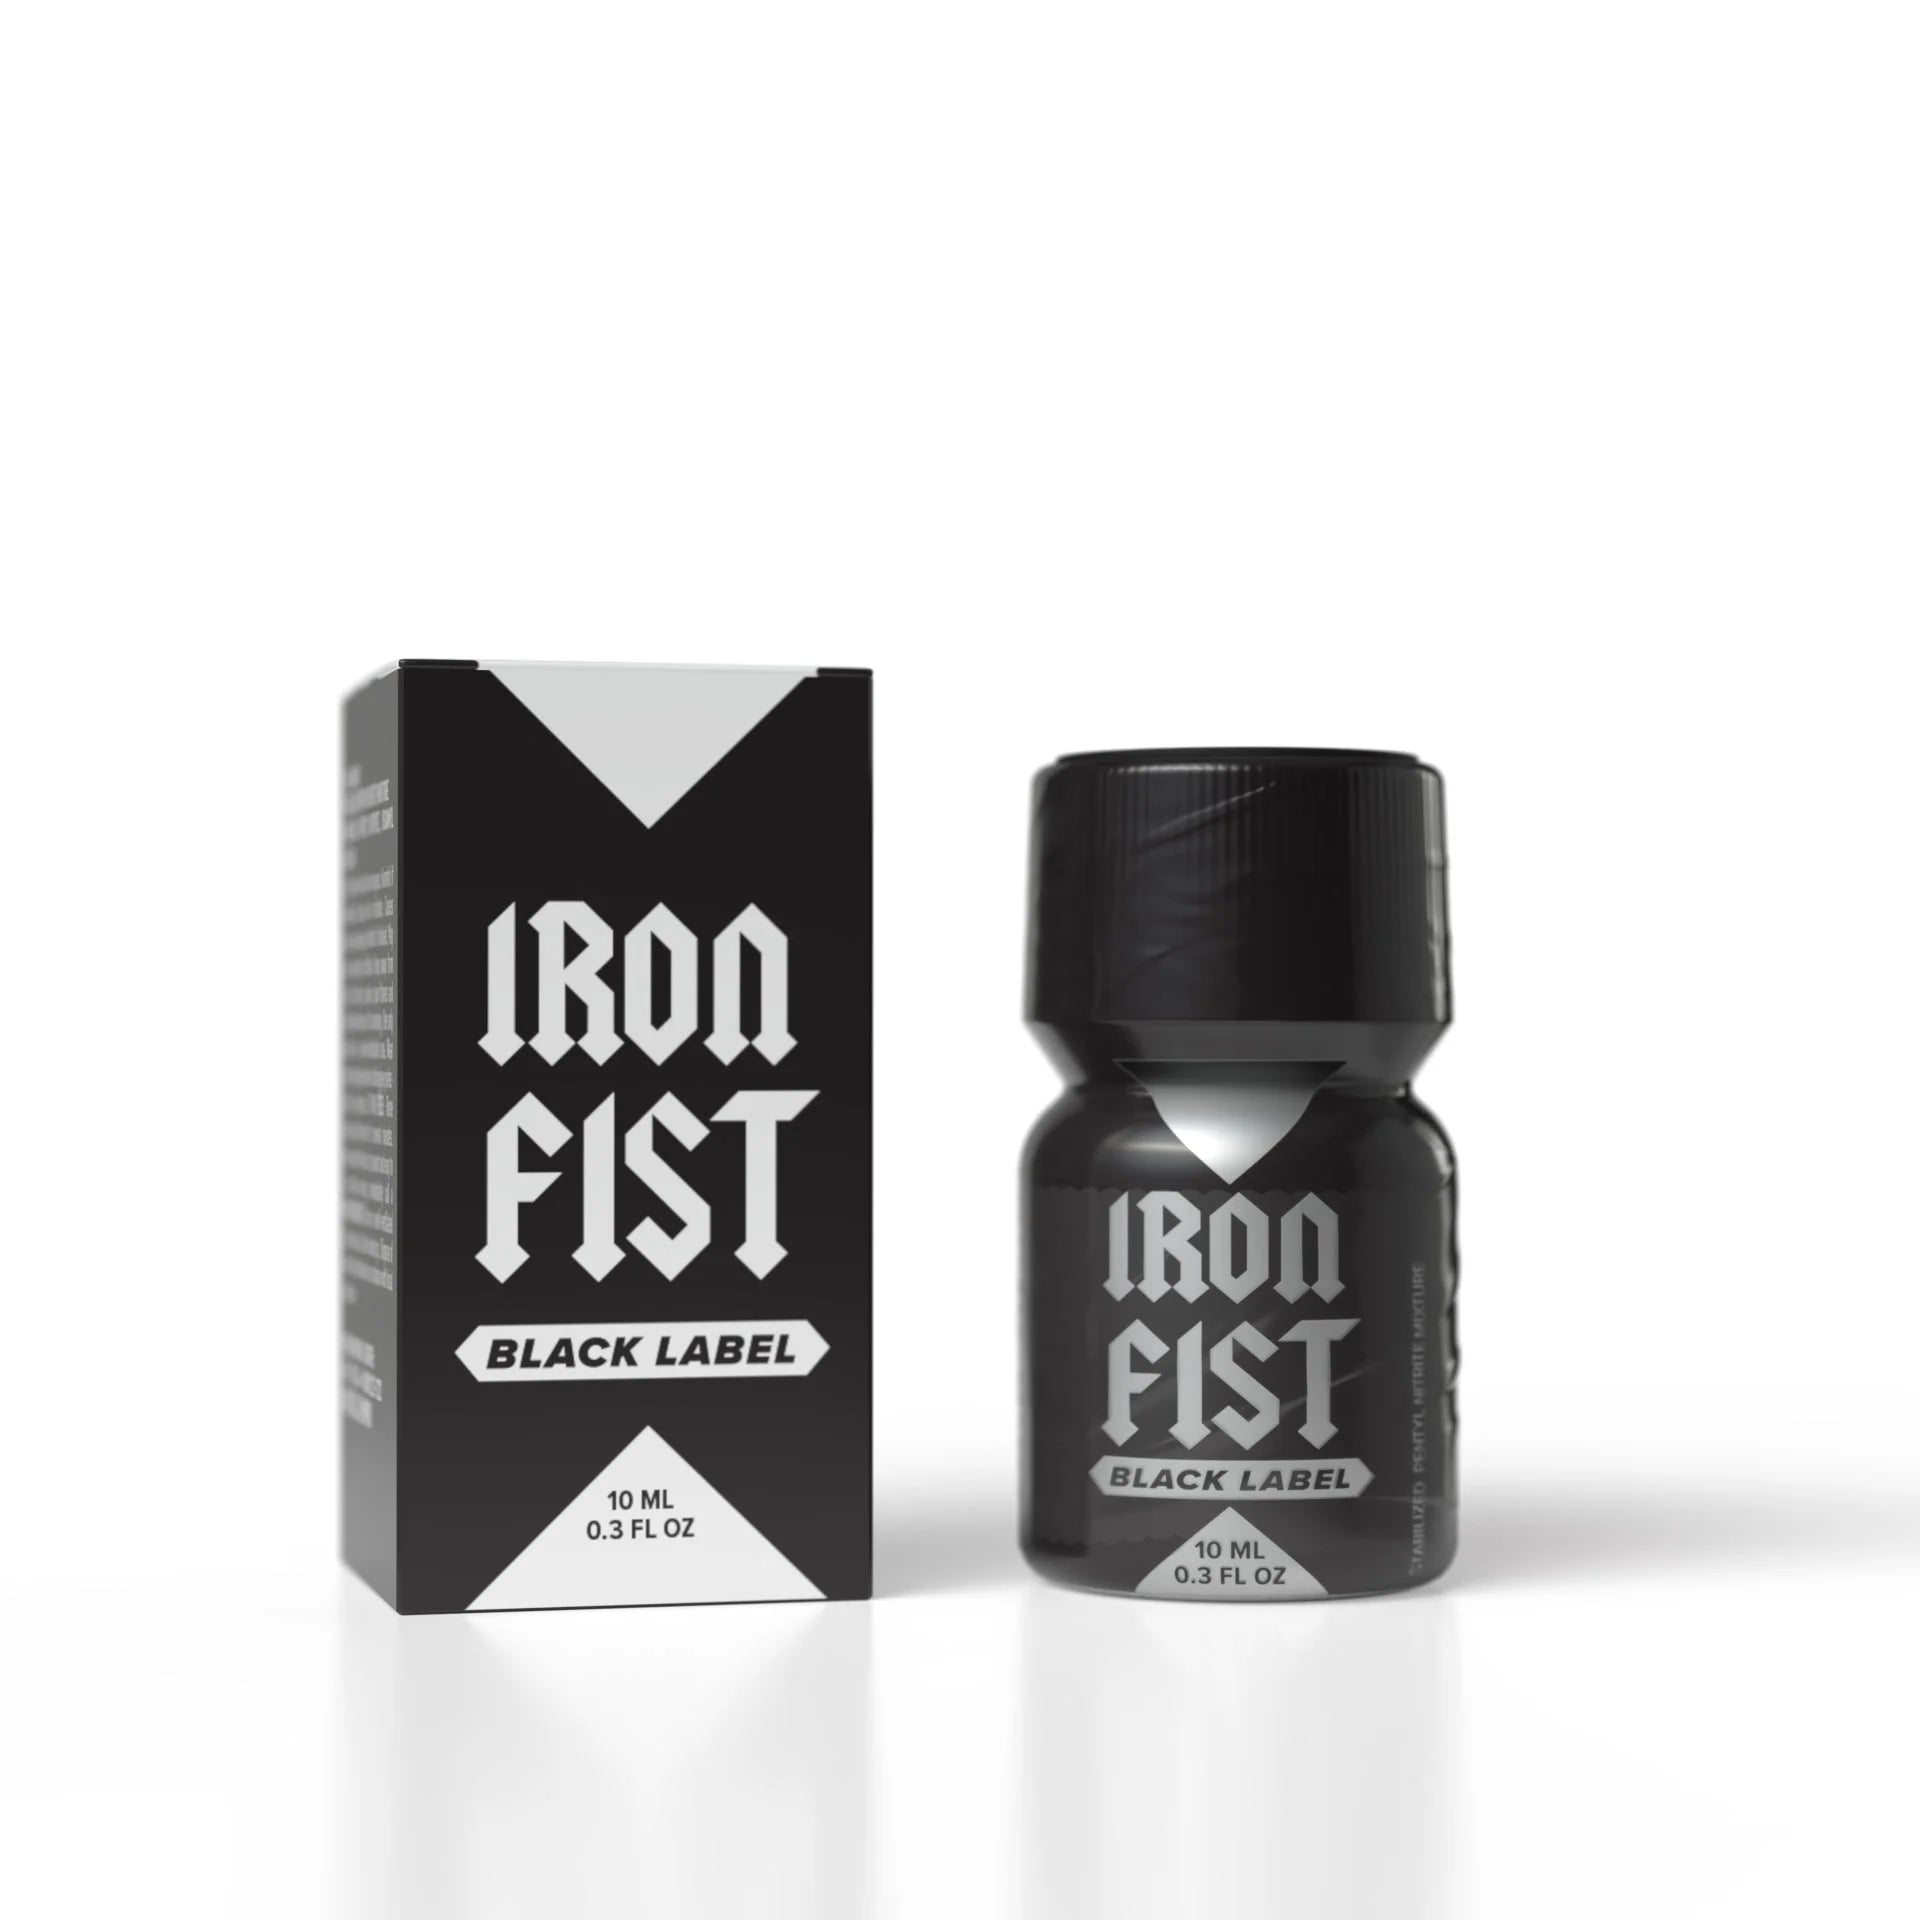 A product photo of Iron Fist Black 10ml Poppers.